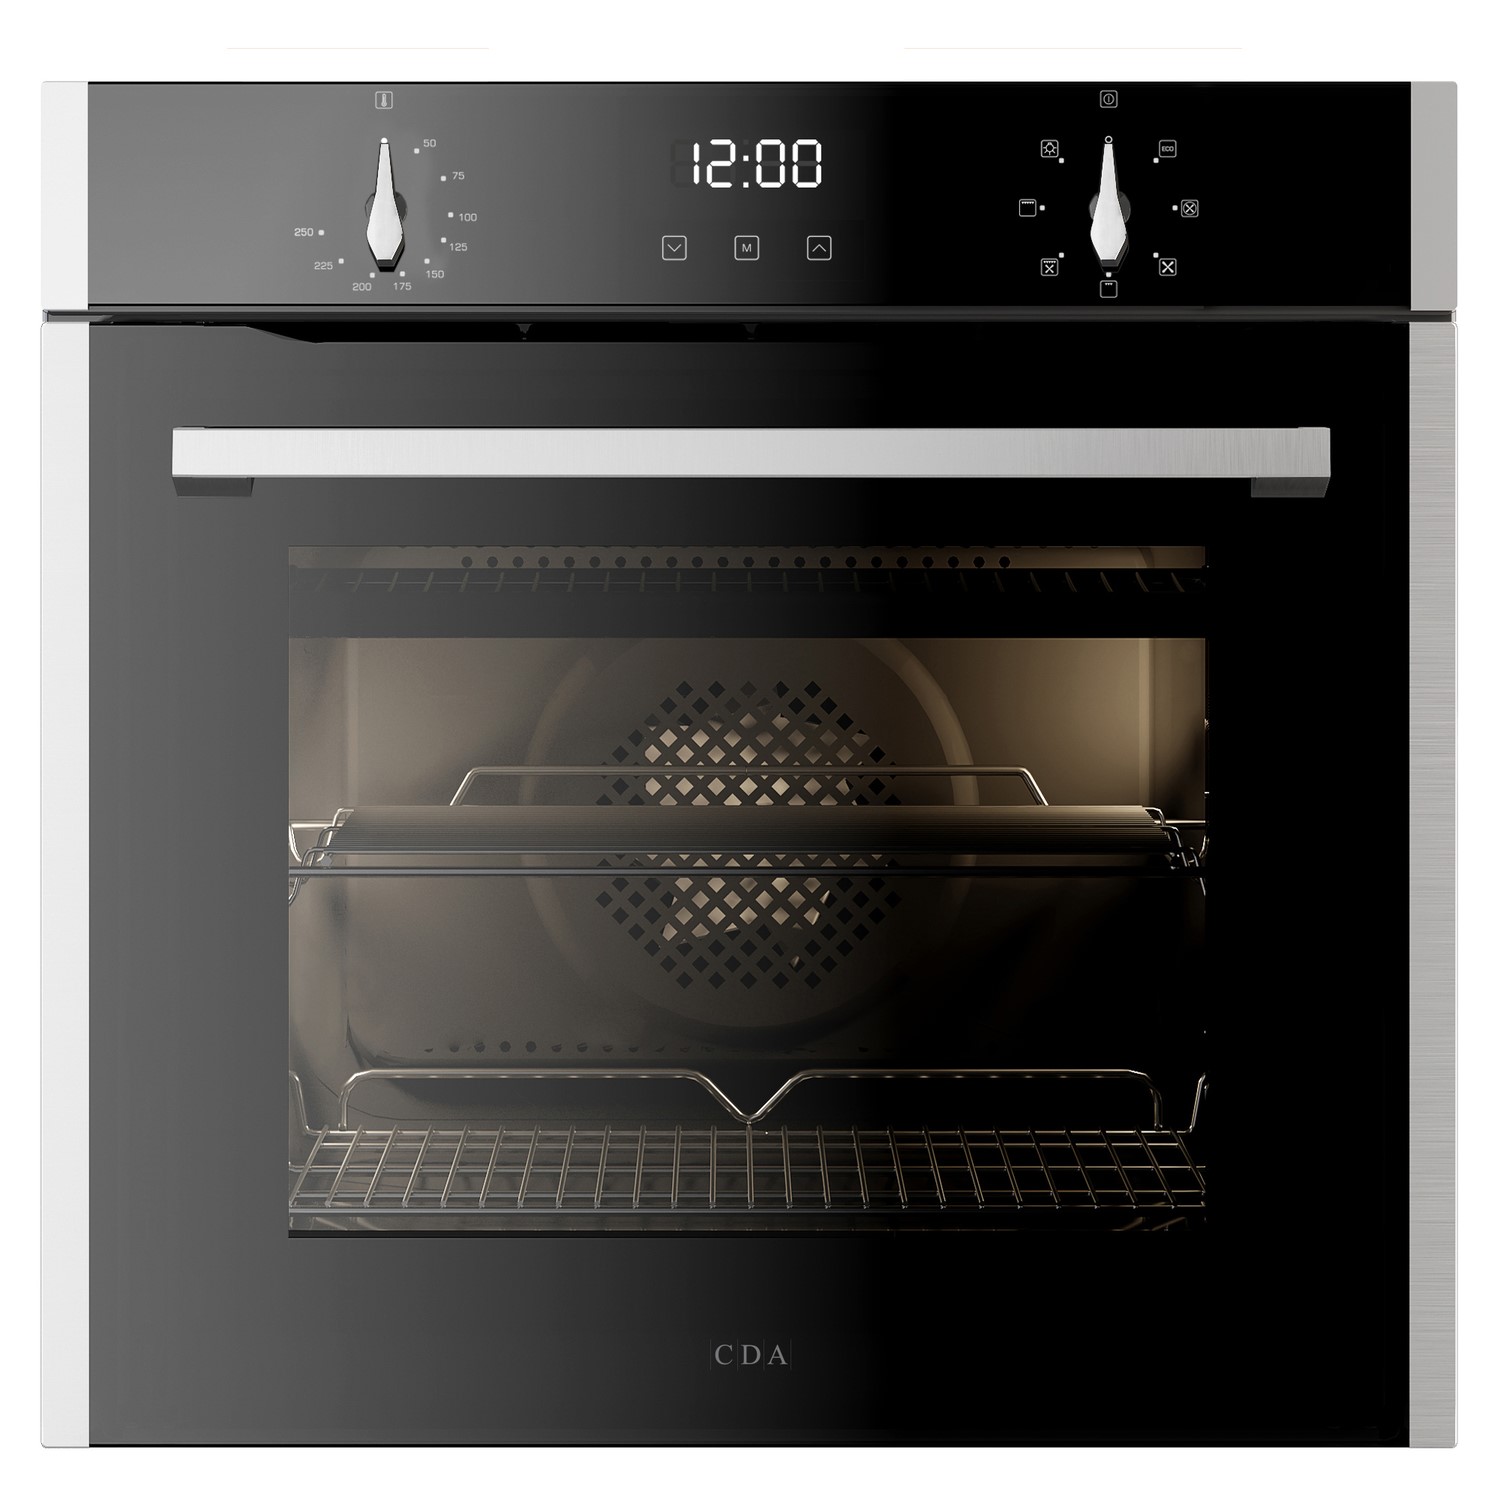 CDA 77L Multifunction Electric Single Oven with Digital Timer - Stainless Steel